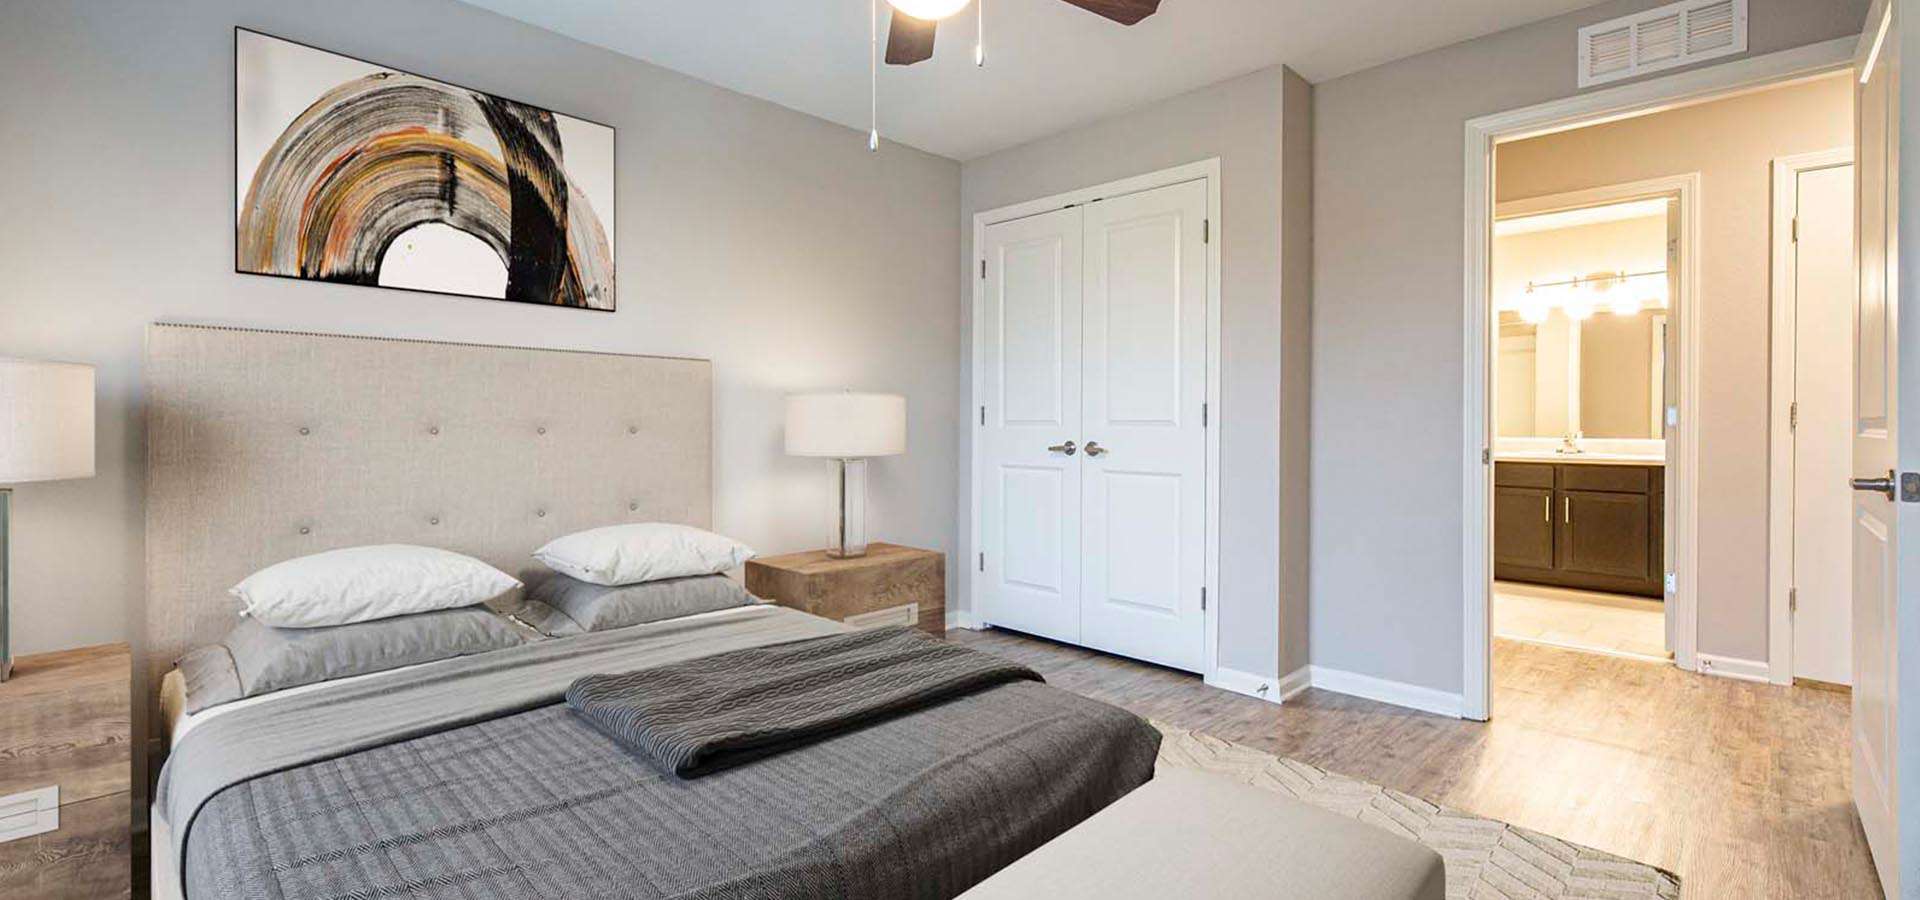 bedroom with vinyl flooring, queen size bed, and high ceiling